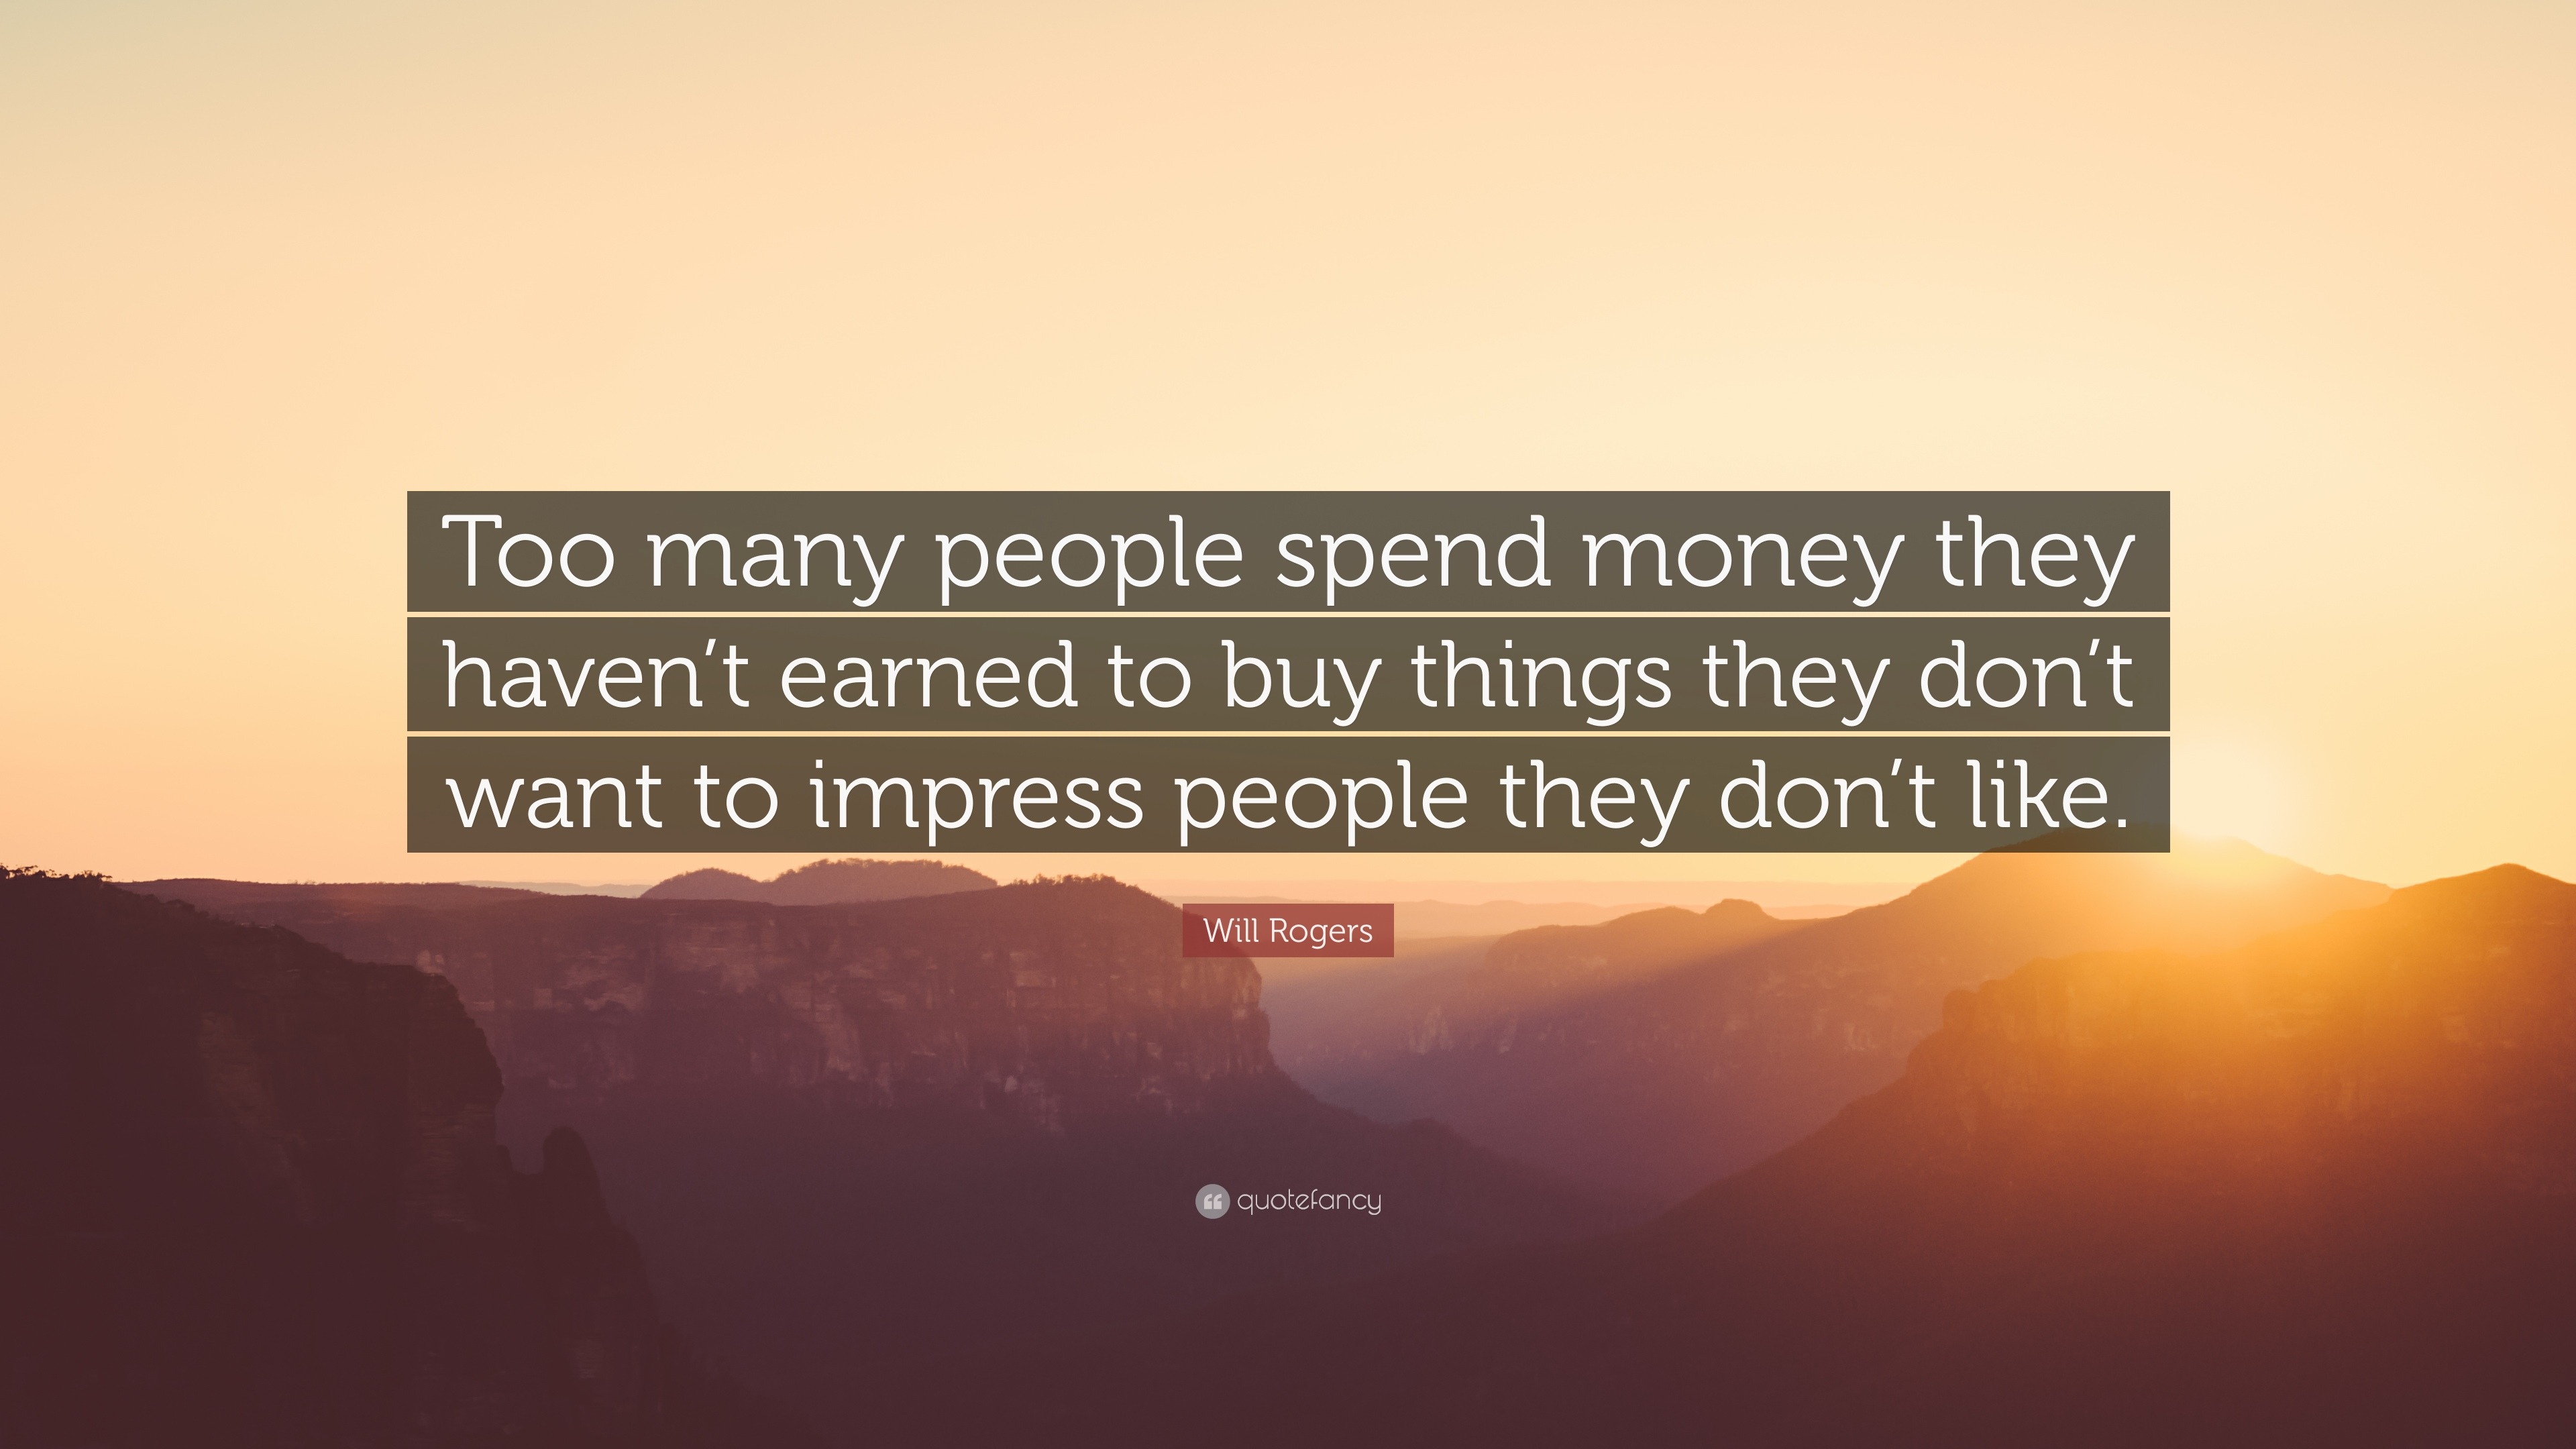 Will Rogers Quote “too Many People Spend Money They Havent Earned To Buy Things They Dont